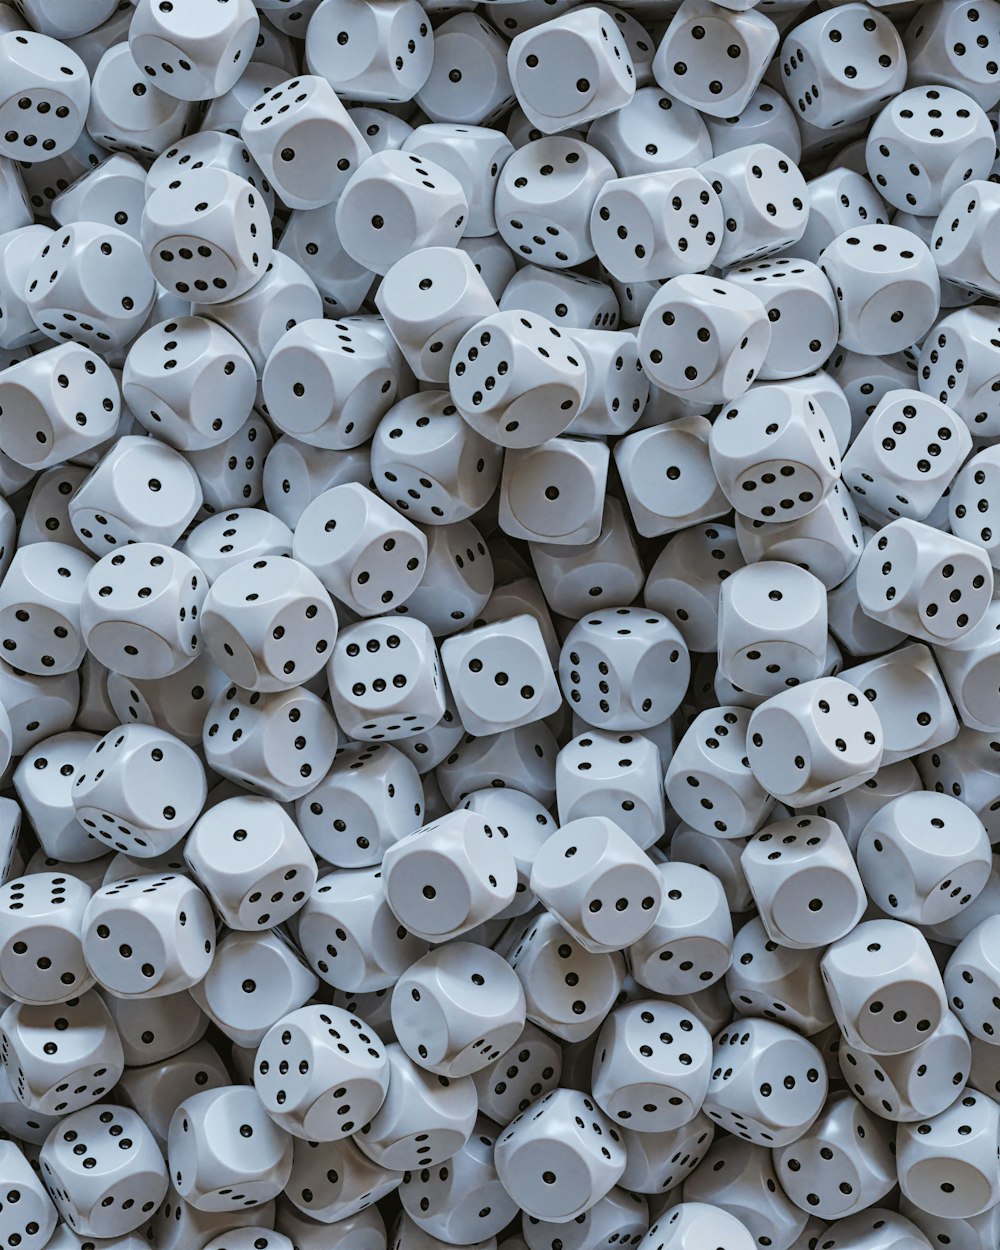 a pile of white dice with black dots